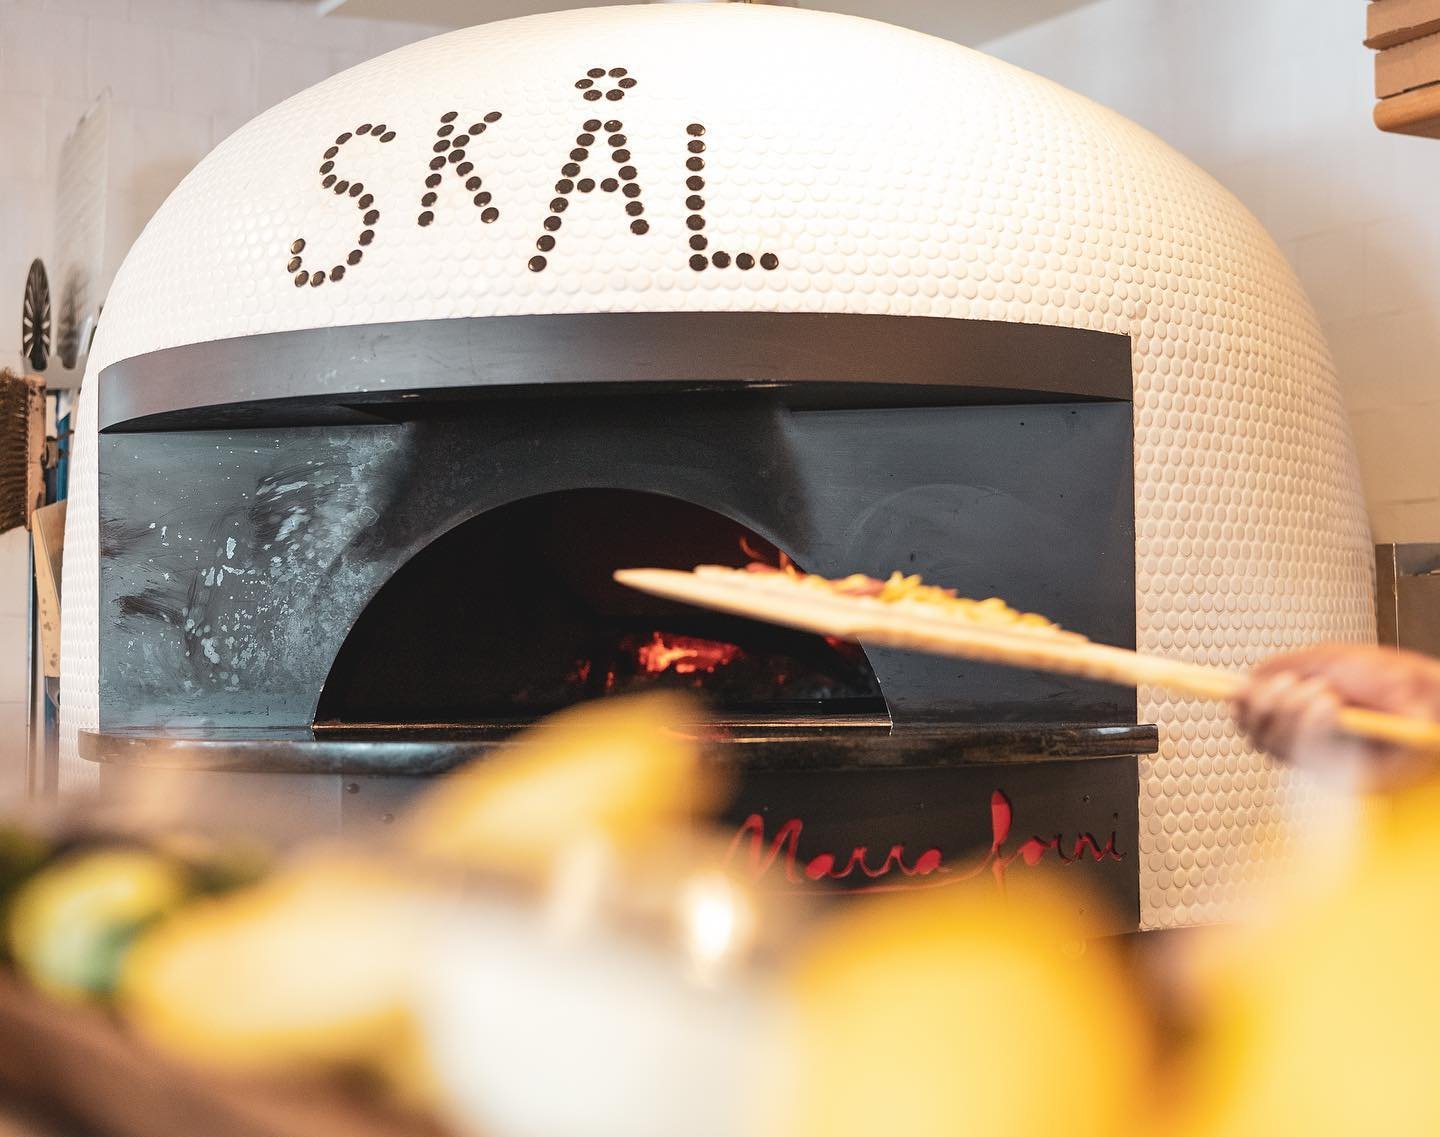 Sk&aring;l Pizza x Fableist Wine Dinner 
Join @skal.pizza for a 5-course wine pairing dinner with @fableistwine on Monday, May 13th from 7 -9:30pm.
Don&rsquo;t miss a deliciously indulgent night filled with great wine, wood fired pizza, seasonal vege